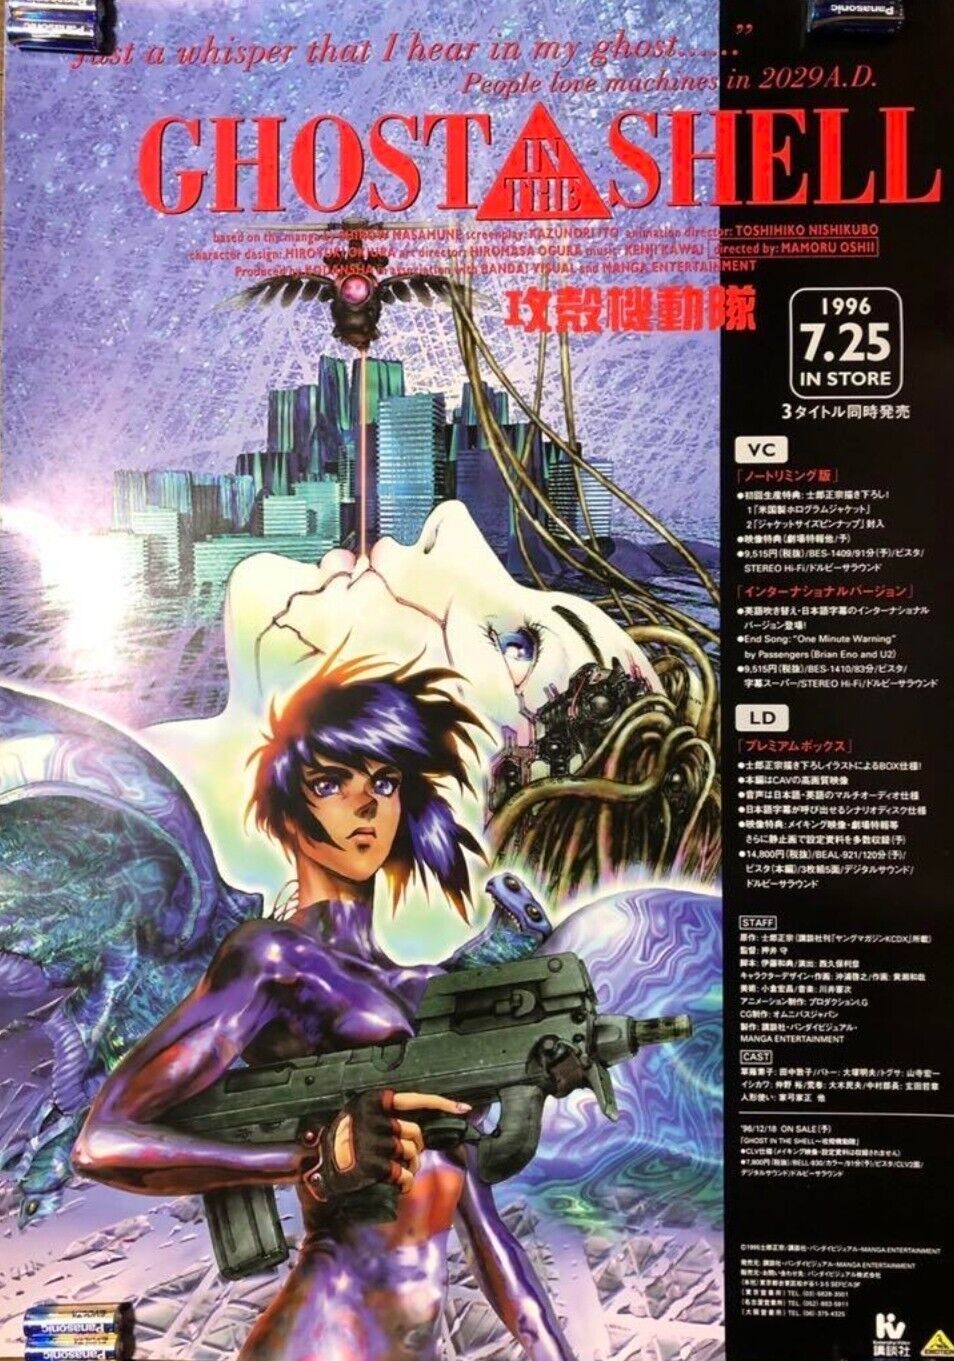 Ghost in the shell B2 Promotion poster 1996 vintage Shirow Masamune Gits